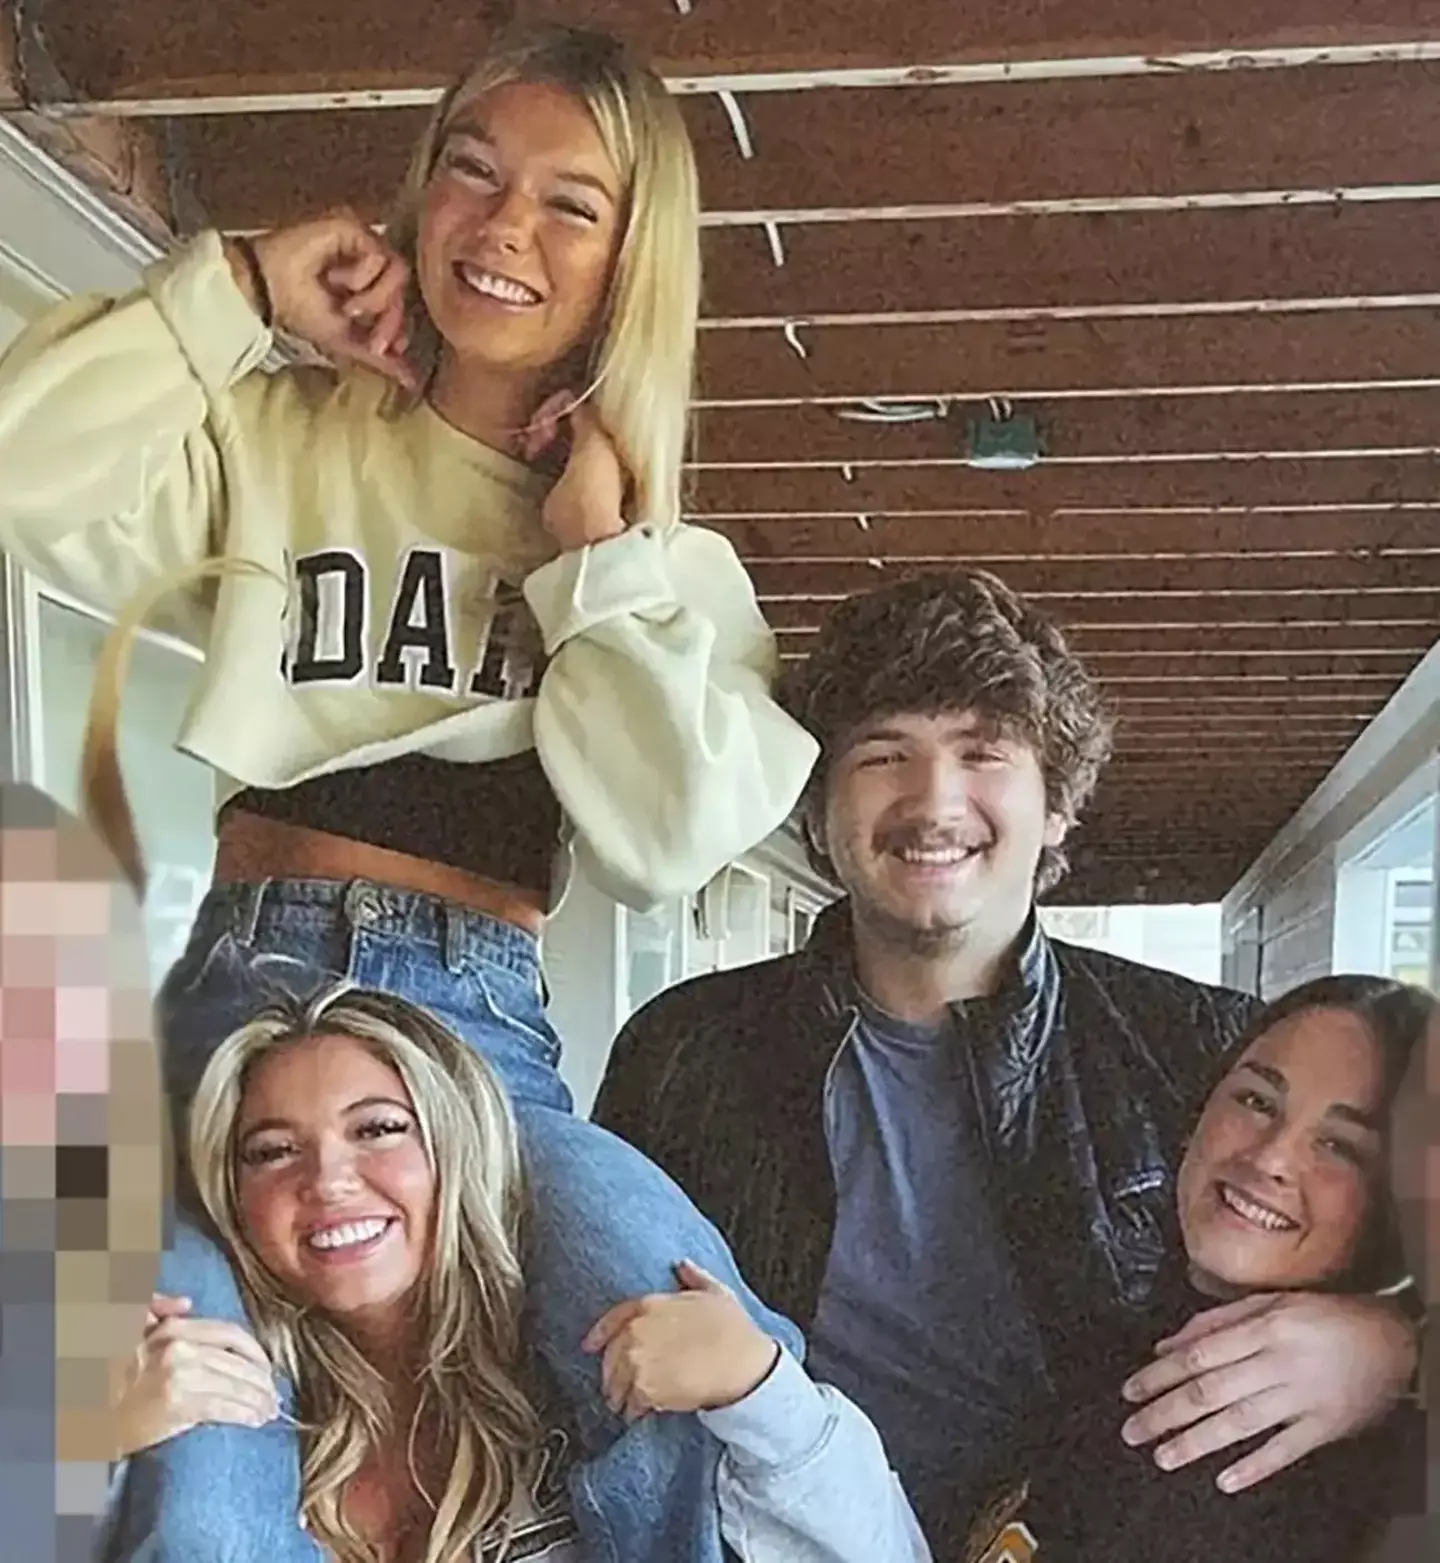 The four friends were killed in November last year.